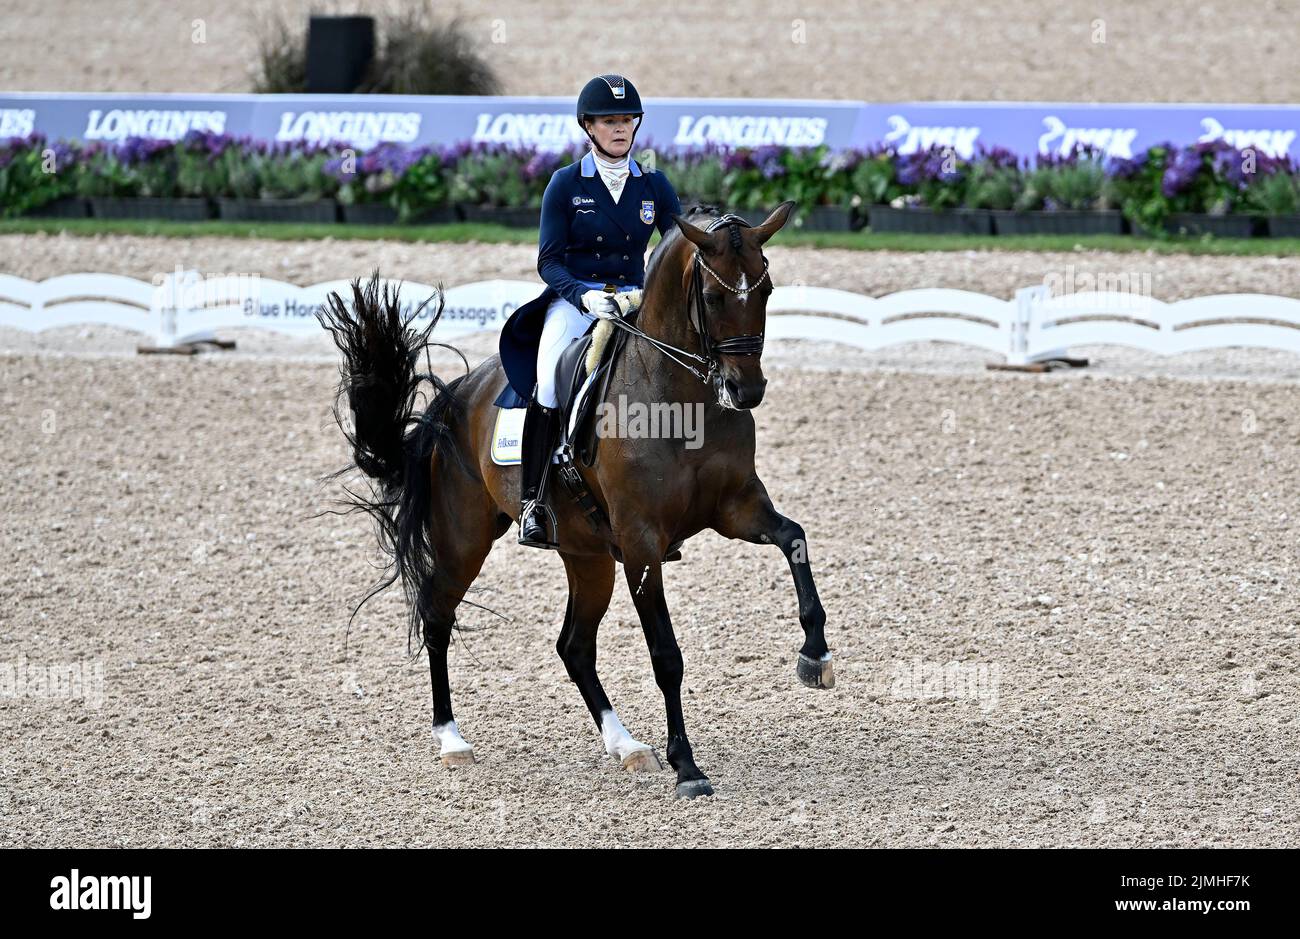 Herning, Denmark. 06th Aug, 2022. World Equestrian Games. Jyske Bank Boxen Stadium. Jeanna Hogberg (SWE) riding ASTORIA during the Blue Hors FEI world dressage team championship grand prix. Credit: Sport In Pictures/Alamy Live News Stock Photo